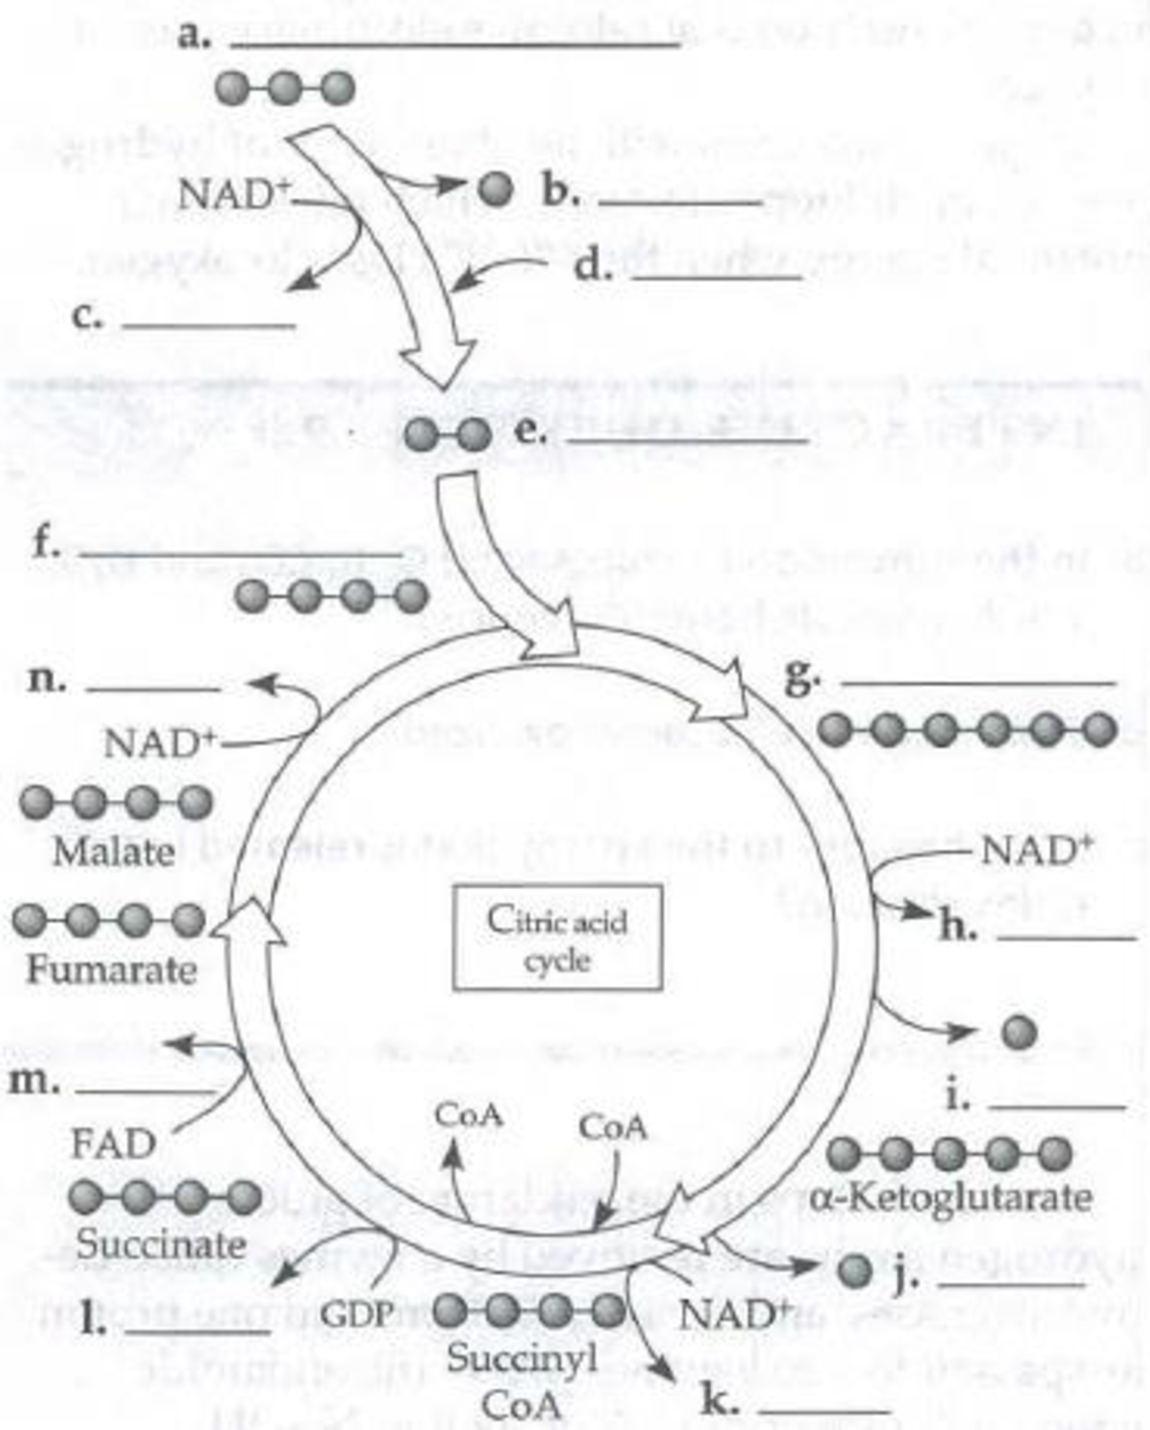 Chapter 9, Problem 7IQ, Fill in the blanks in the following diagram of the citric acid cycle. Gray balls represent carbon 